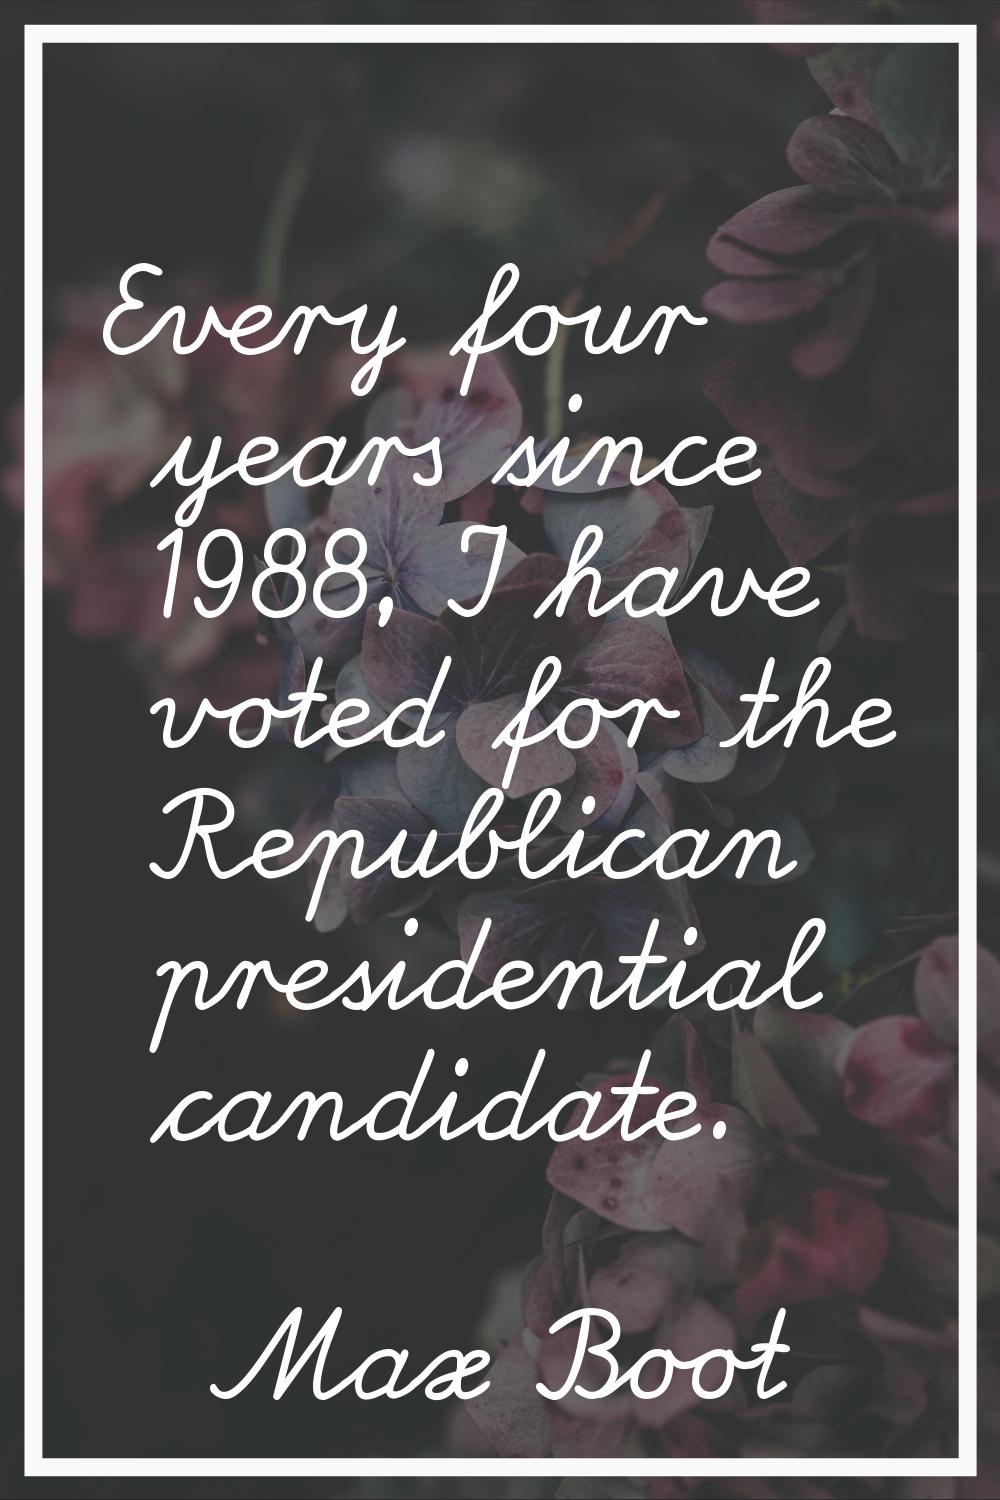 Every four years since 1988, I have voted for the Republican presidential candidate.